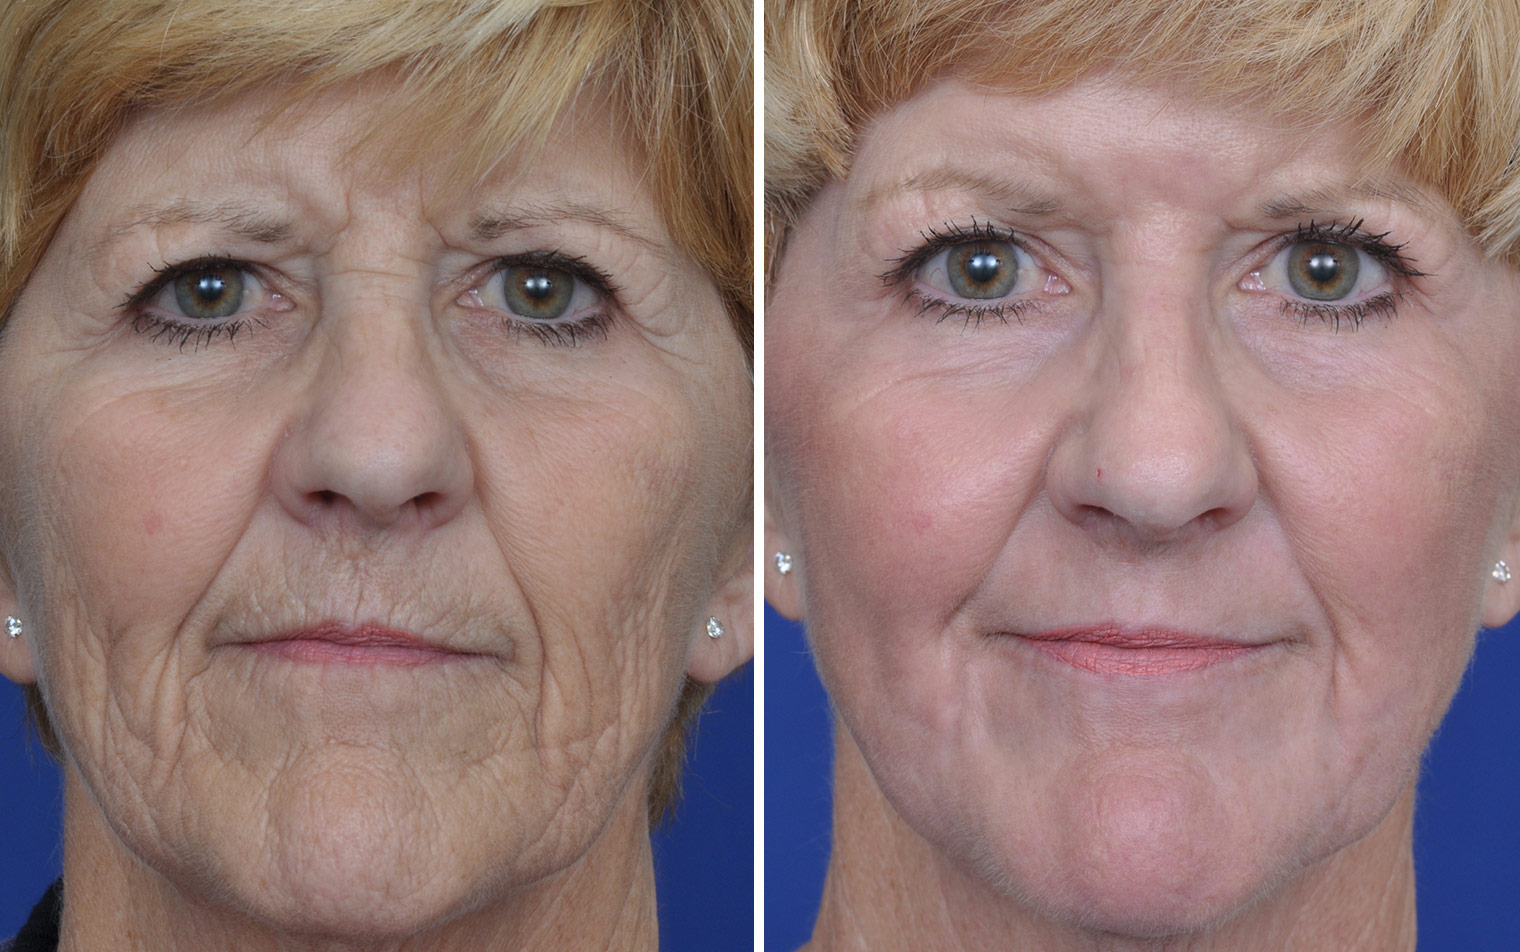 Laser Skin Resurfacing Before And After Annapolis Plastic Surgery